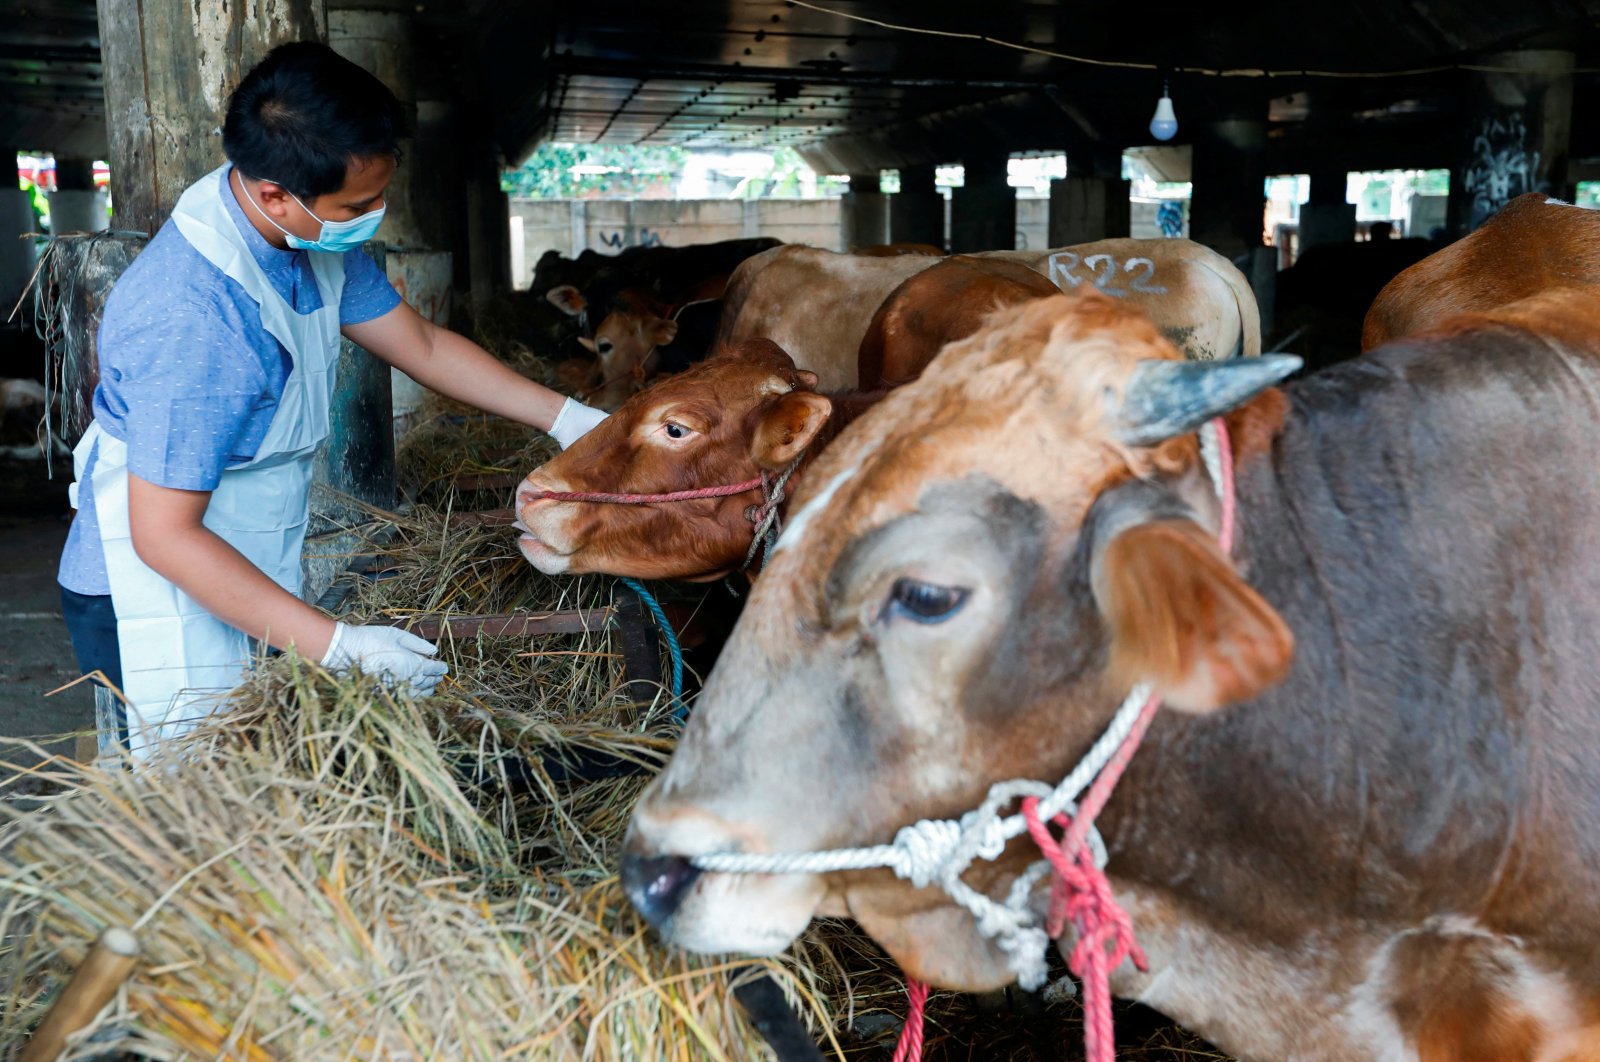 A Marine and Agricultural Food Security officer inspects a cow to prevent the spread of foot and mouth disease in Tanjung Priok, North Jakarta, Indonesia, June 24, 2022. (Reuters Photo)